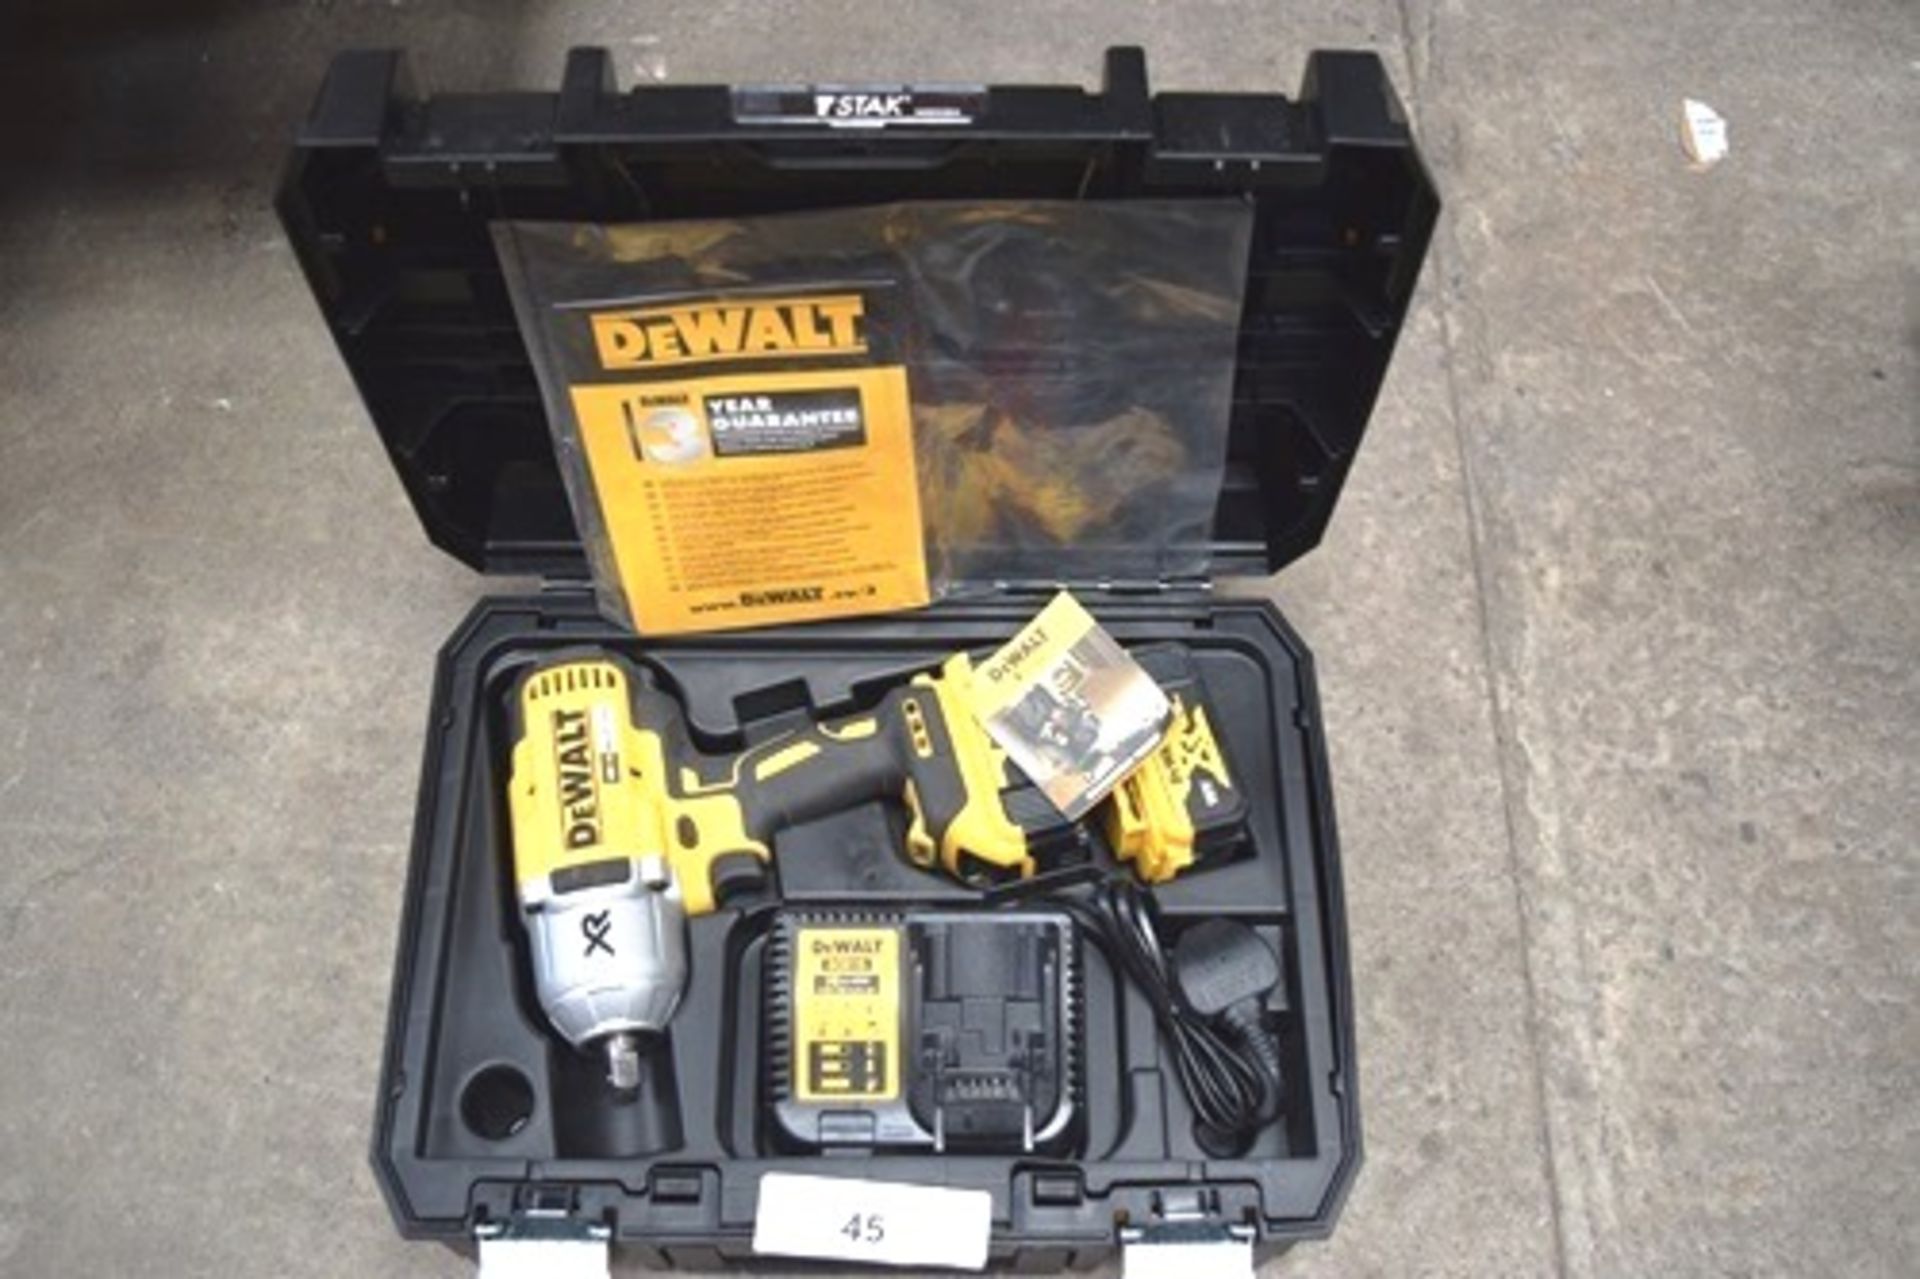 1 x DeWalt 18V high torque brushless impact wrench, model DCF899P2, 1/2" sq drive, with 2 x 18V 5. - Image 2 of 2